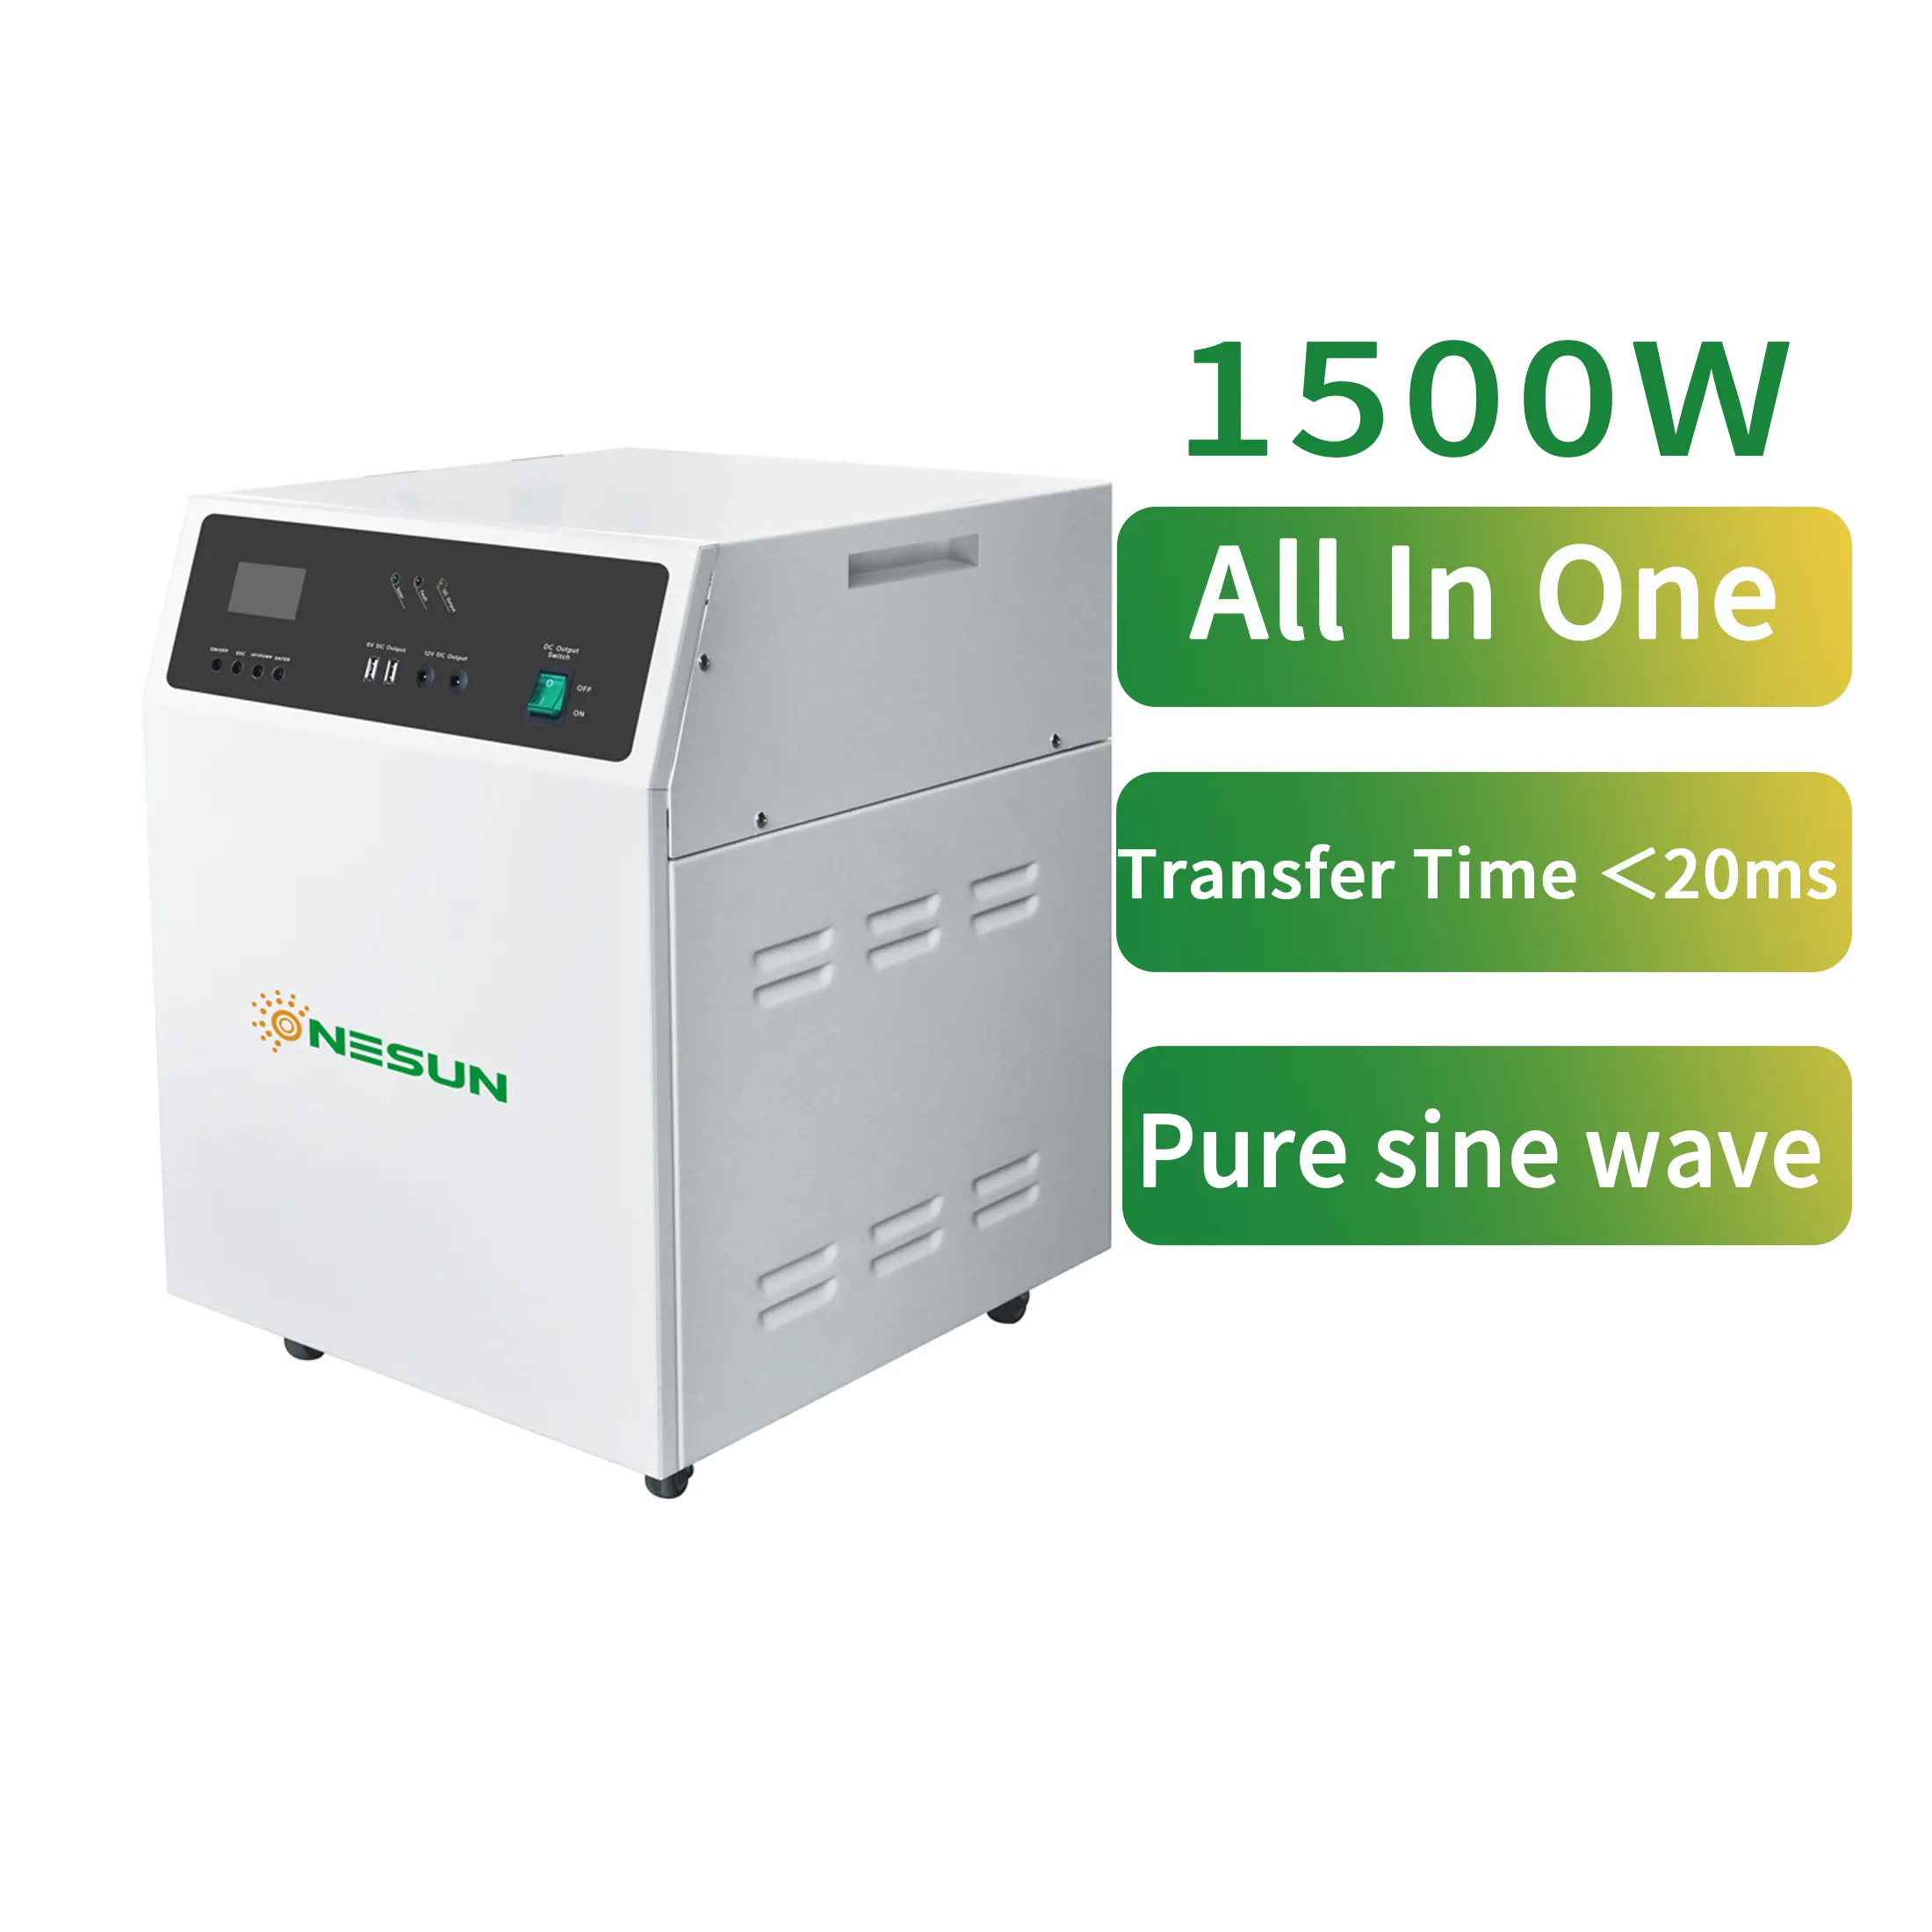 ONESUN Low Power 1500W Gel Cell All In One Home Energy Storage System per Living Power Utility